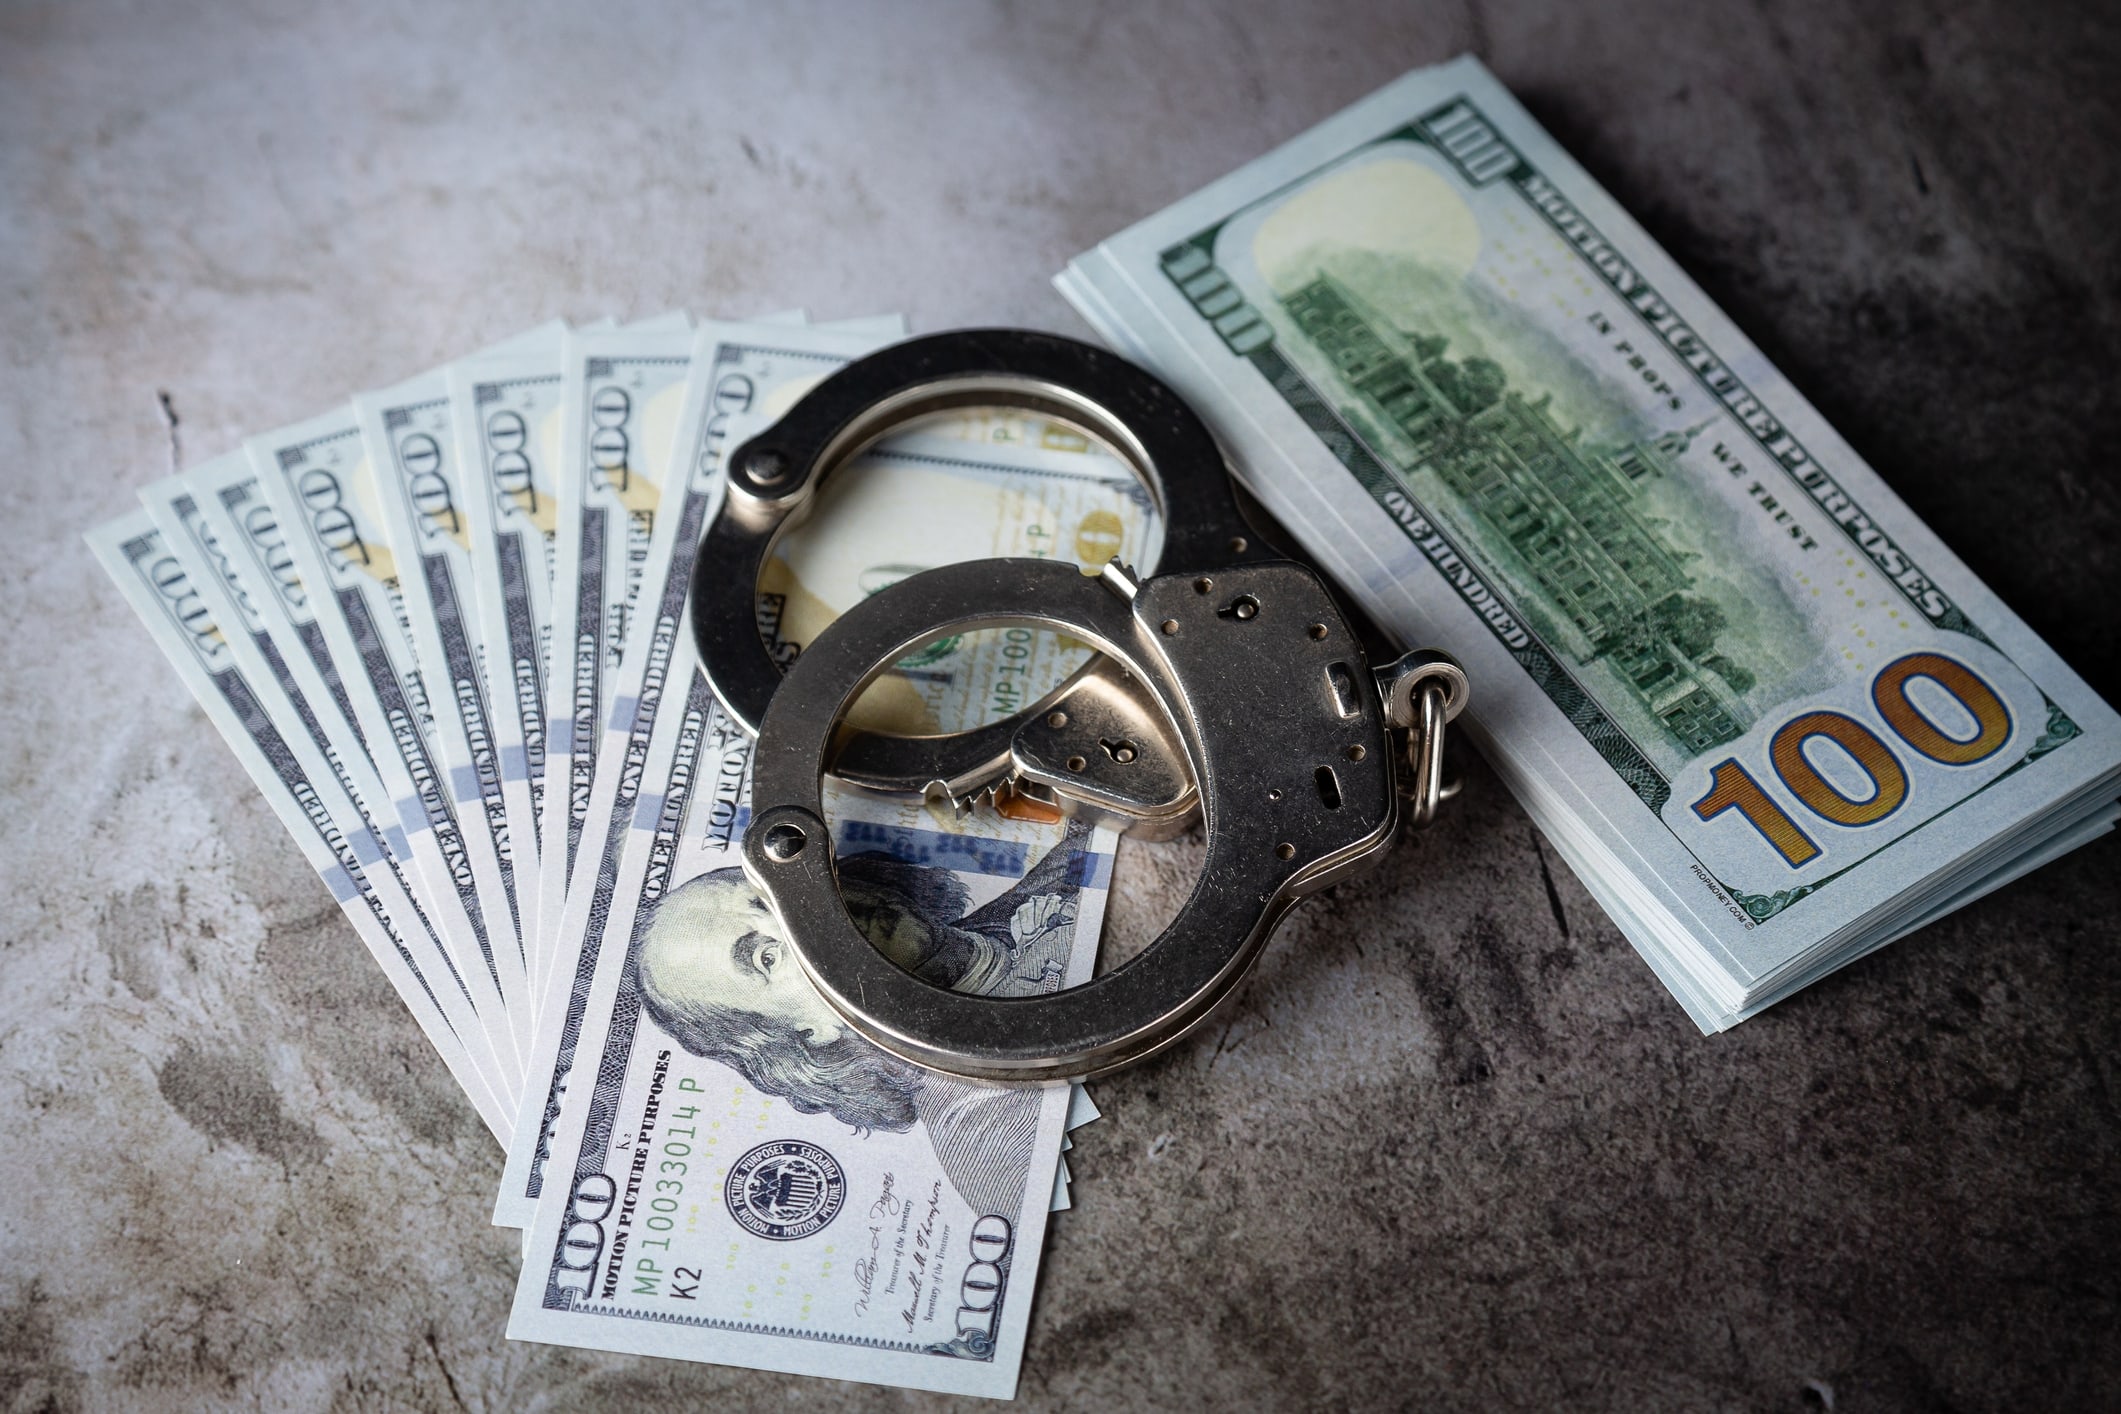 Experienced criminal lawyers in York, PA are here to assist with your theft crime defense.